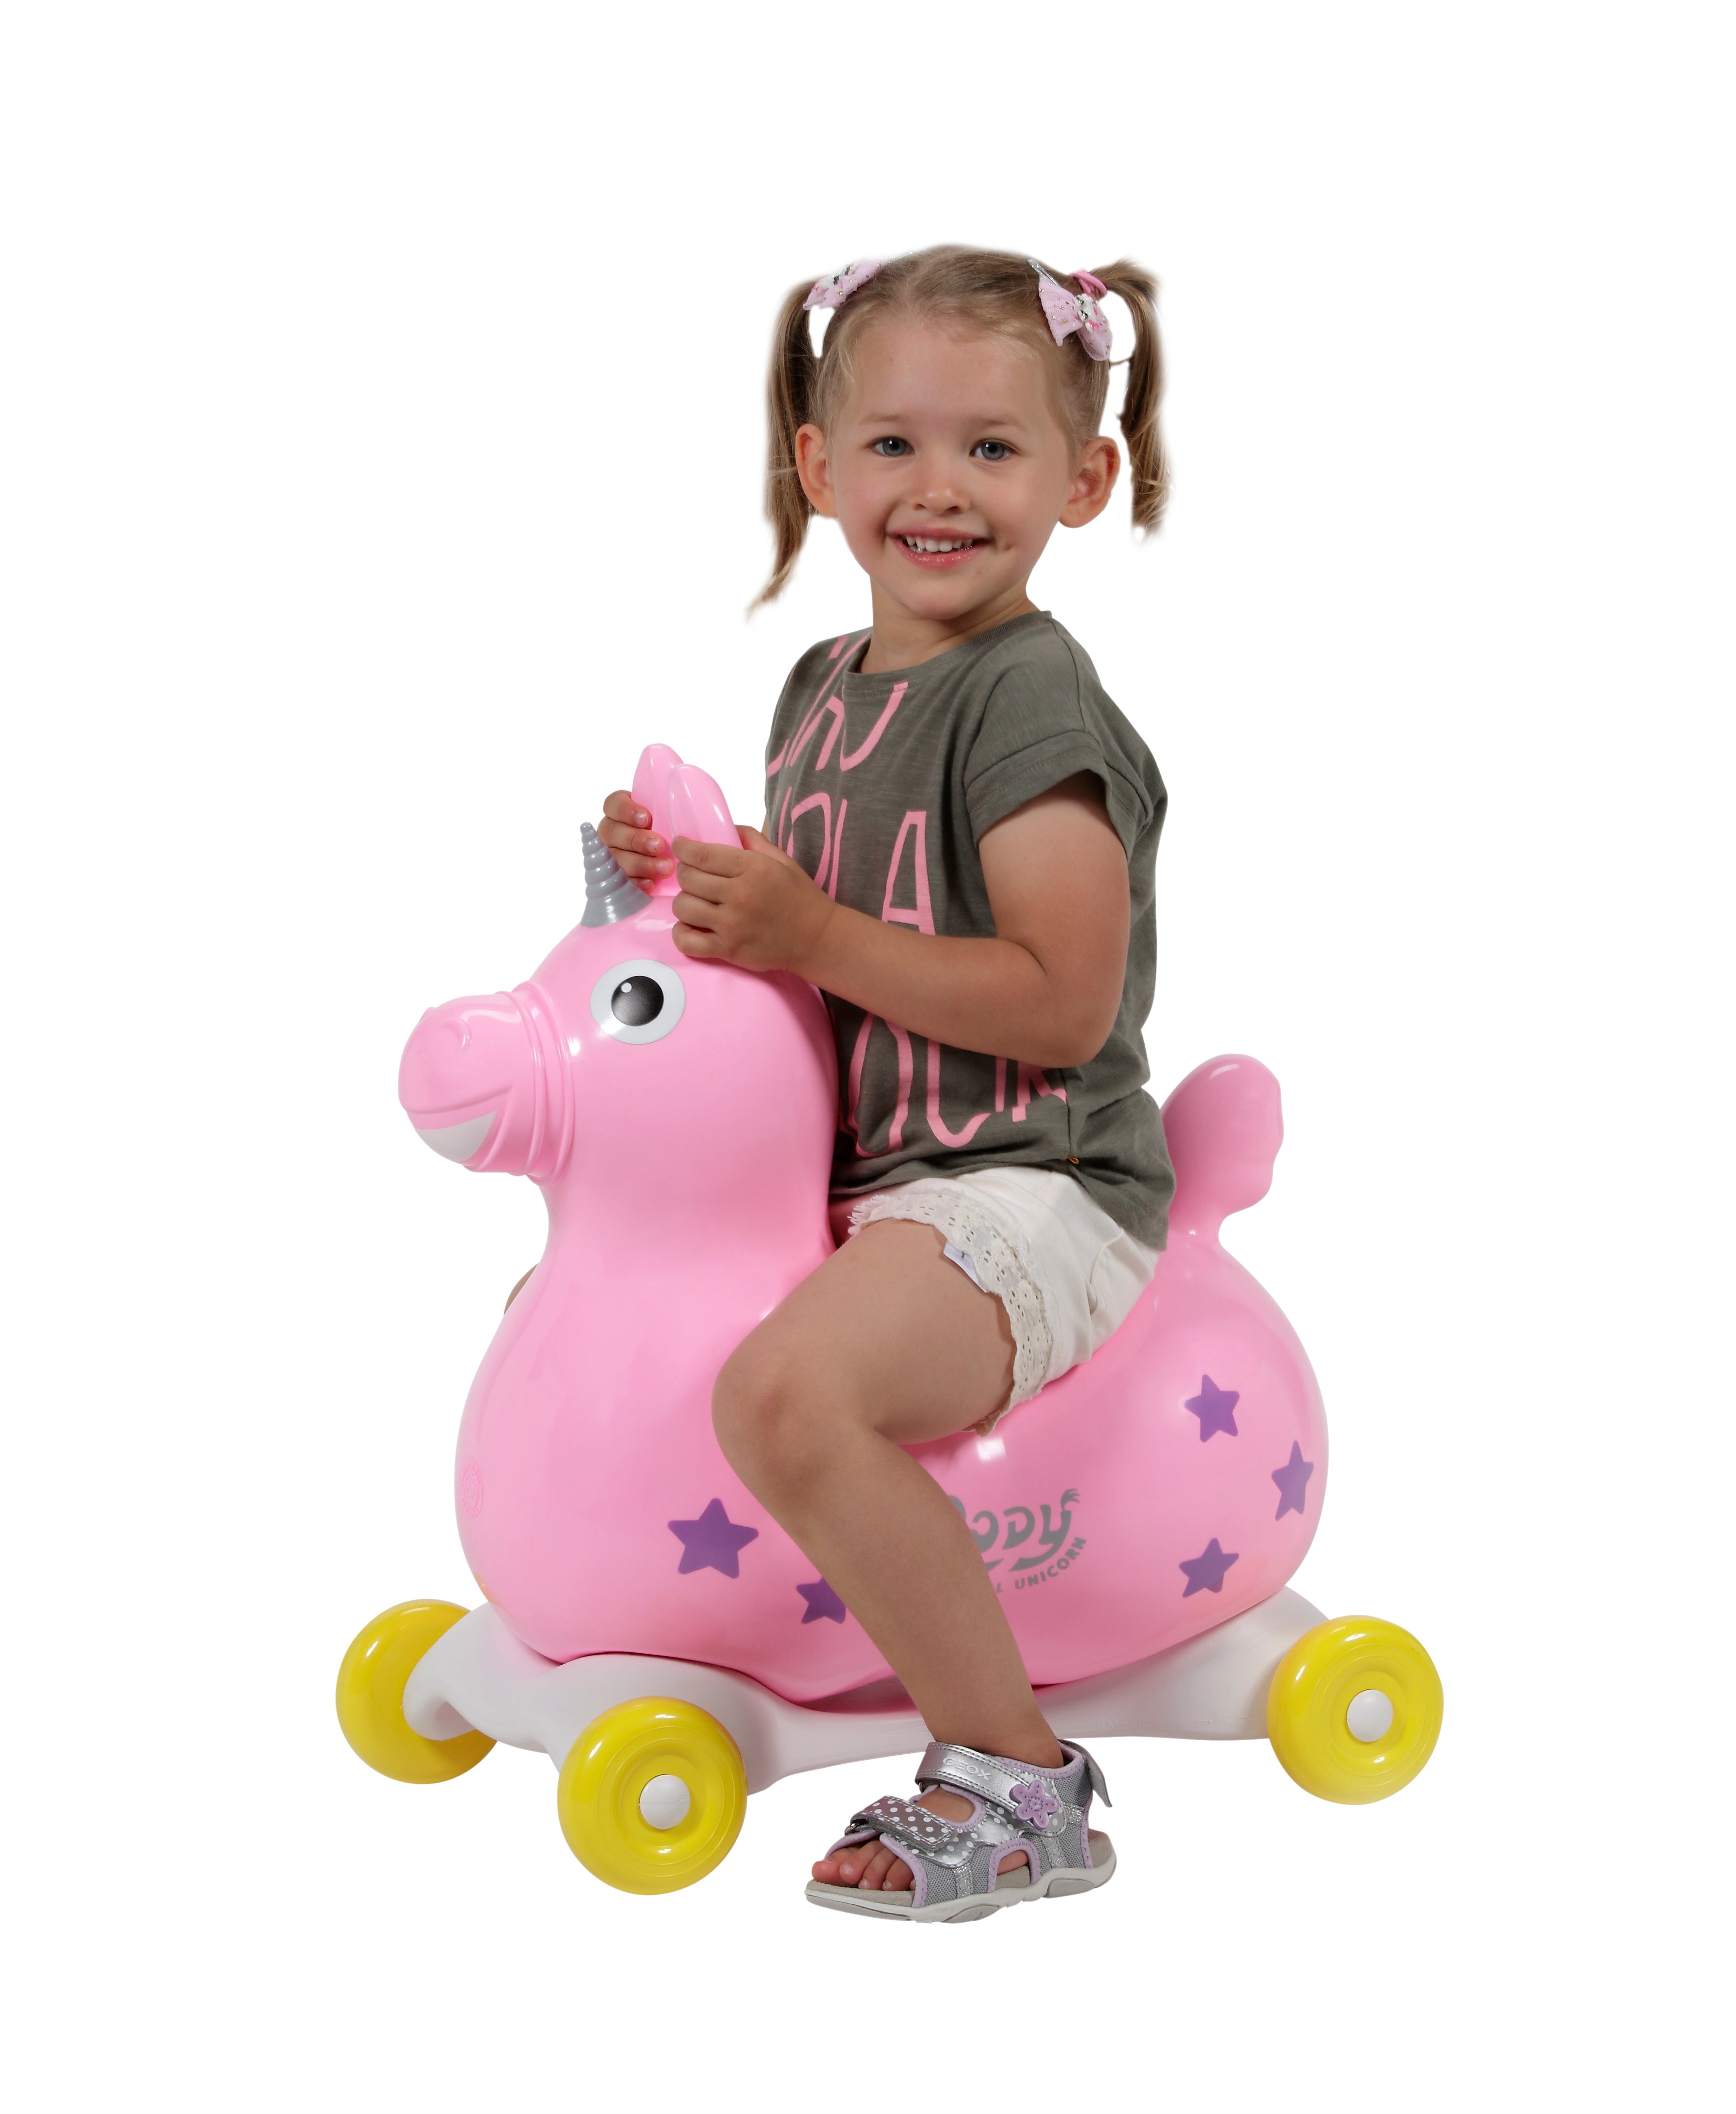 Rody Magical Unicorn Bounce Toy With Pump